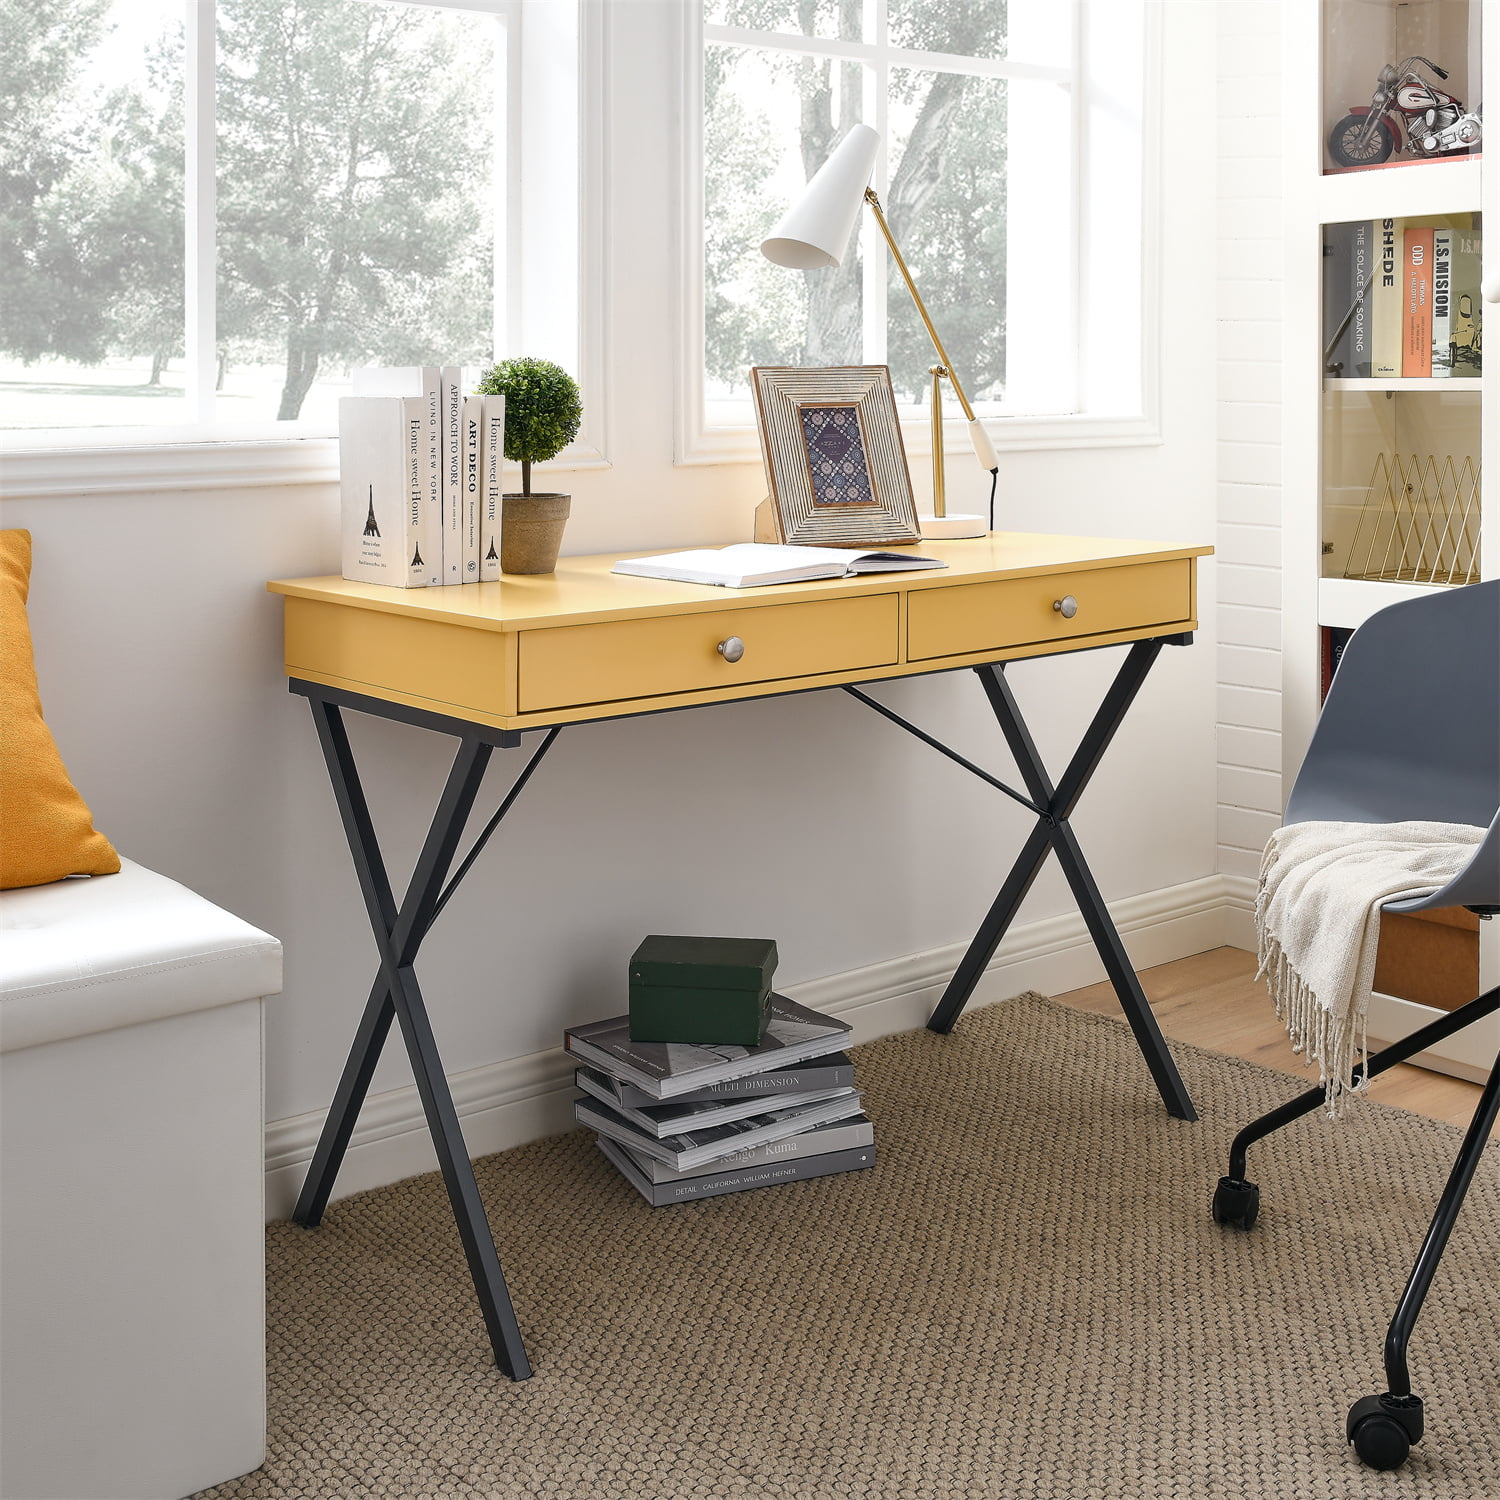 Top Study Desks for Kids Rooms or Home Office